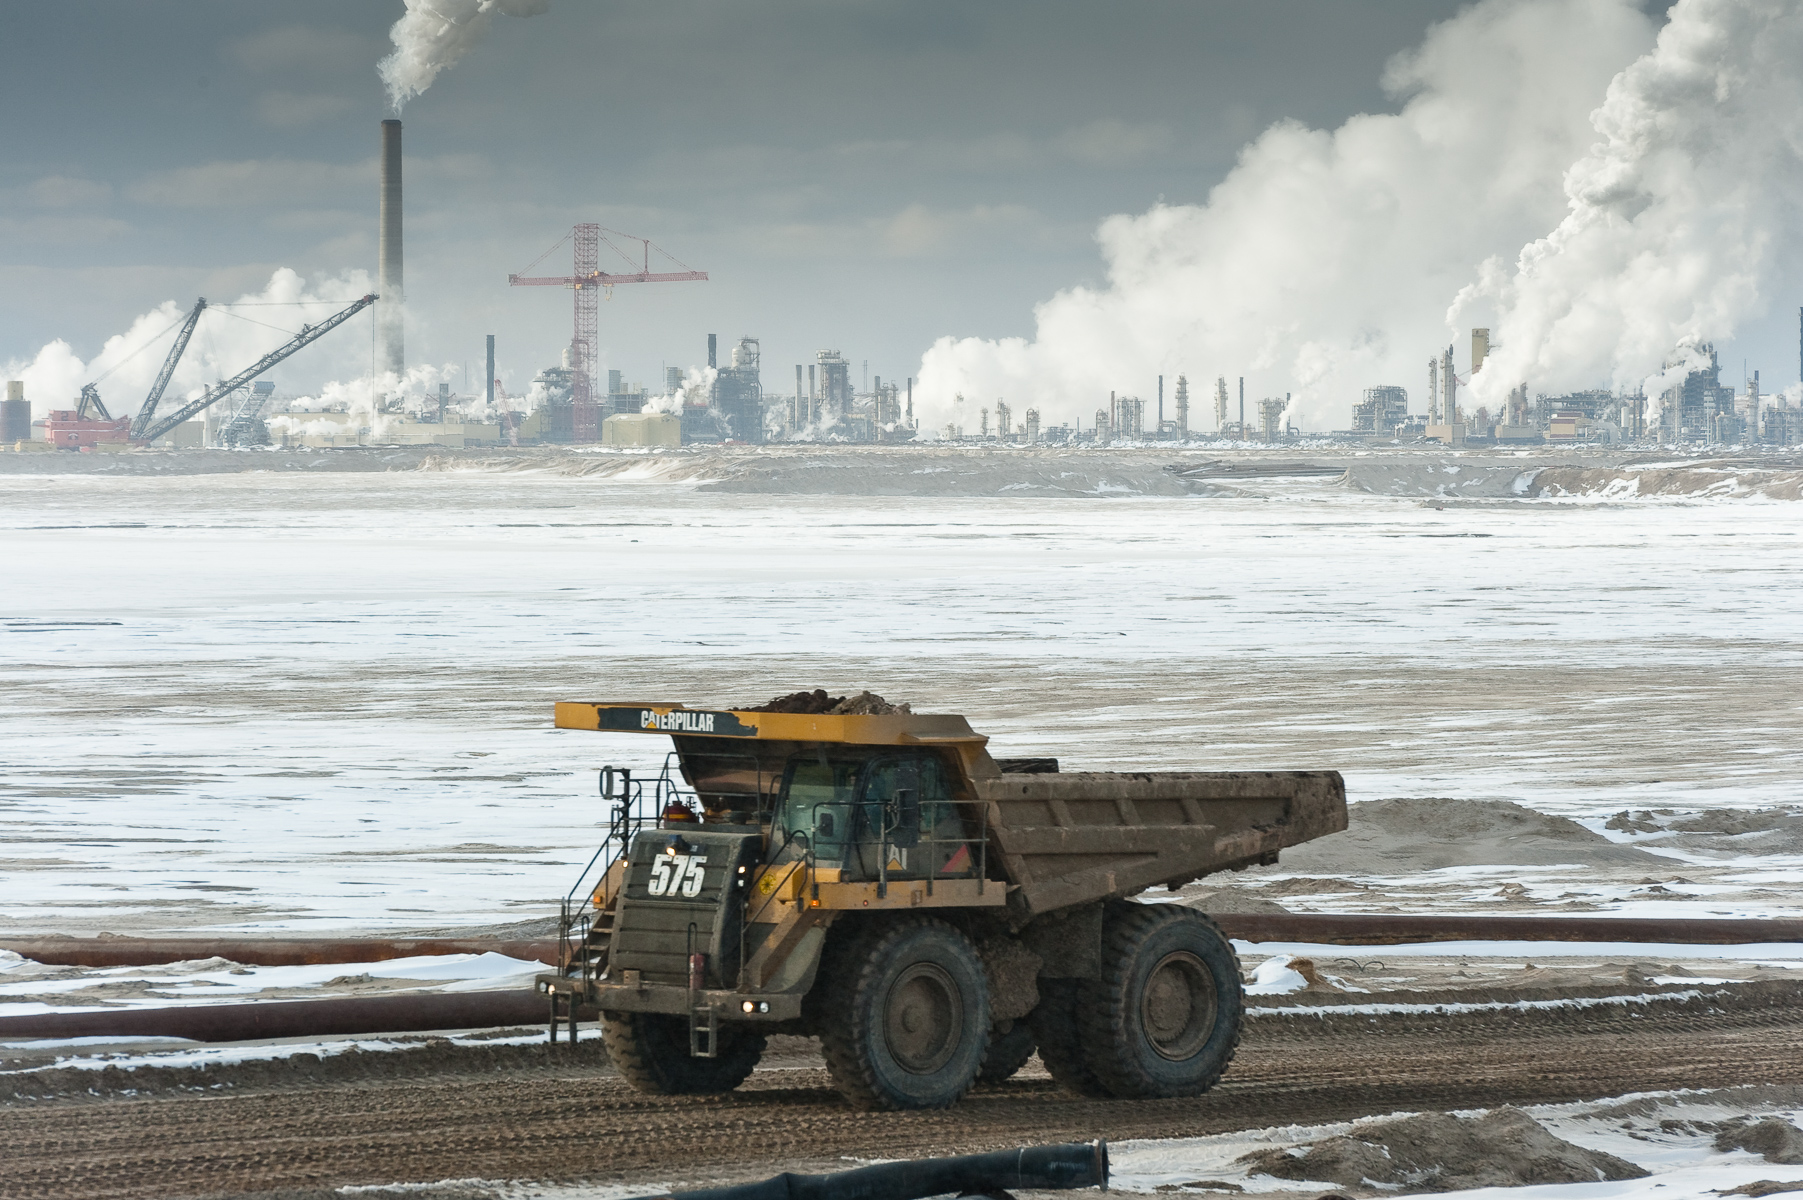 Tar Sands, March 2010. Syncrude frozen tailings pond and Mildred Lake Upgrader in background and dumptrucks. Athabasca Tar Sands, Alberta, Canada.Fine Art Print Price ListOpen and Larger Edition Prints. These are produced to the same high standards as our limited edition prints and offer collectors a more affordable way to get to know our work.Prints  are limited to an edition of 50 in each size above 20” X 24”. Prices are for prints only and do not include tax or shipping.All prices are in US dollars.			12”x18” 					$350.16”x24” 				       $650.20”x30” 					$1000.24”x36” 				       $1500. 30”x45” 					$2300.40”x60”				      $3600